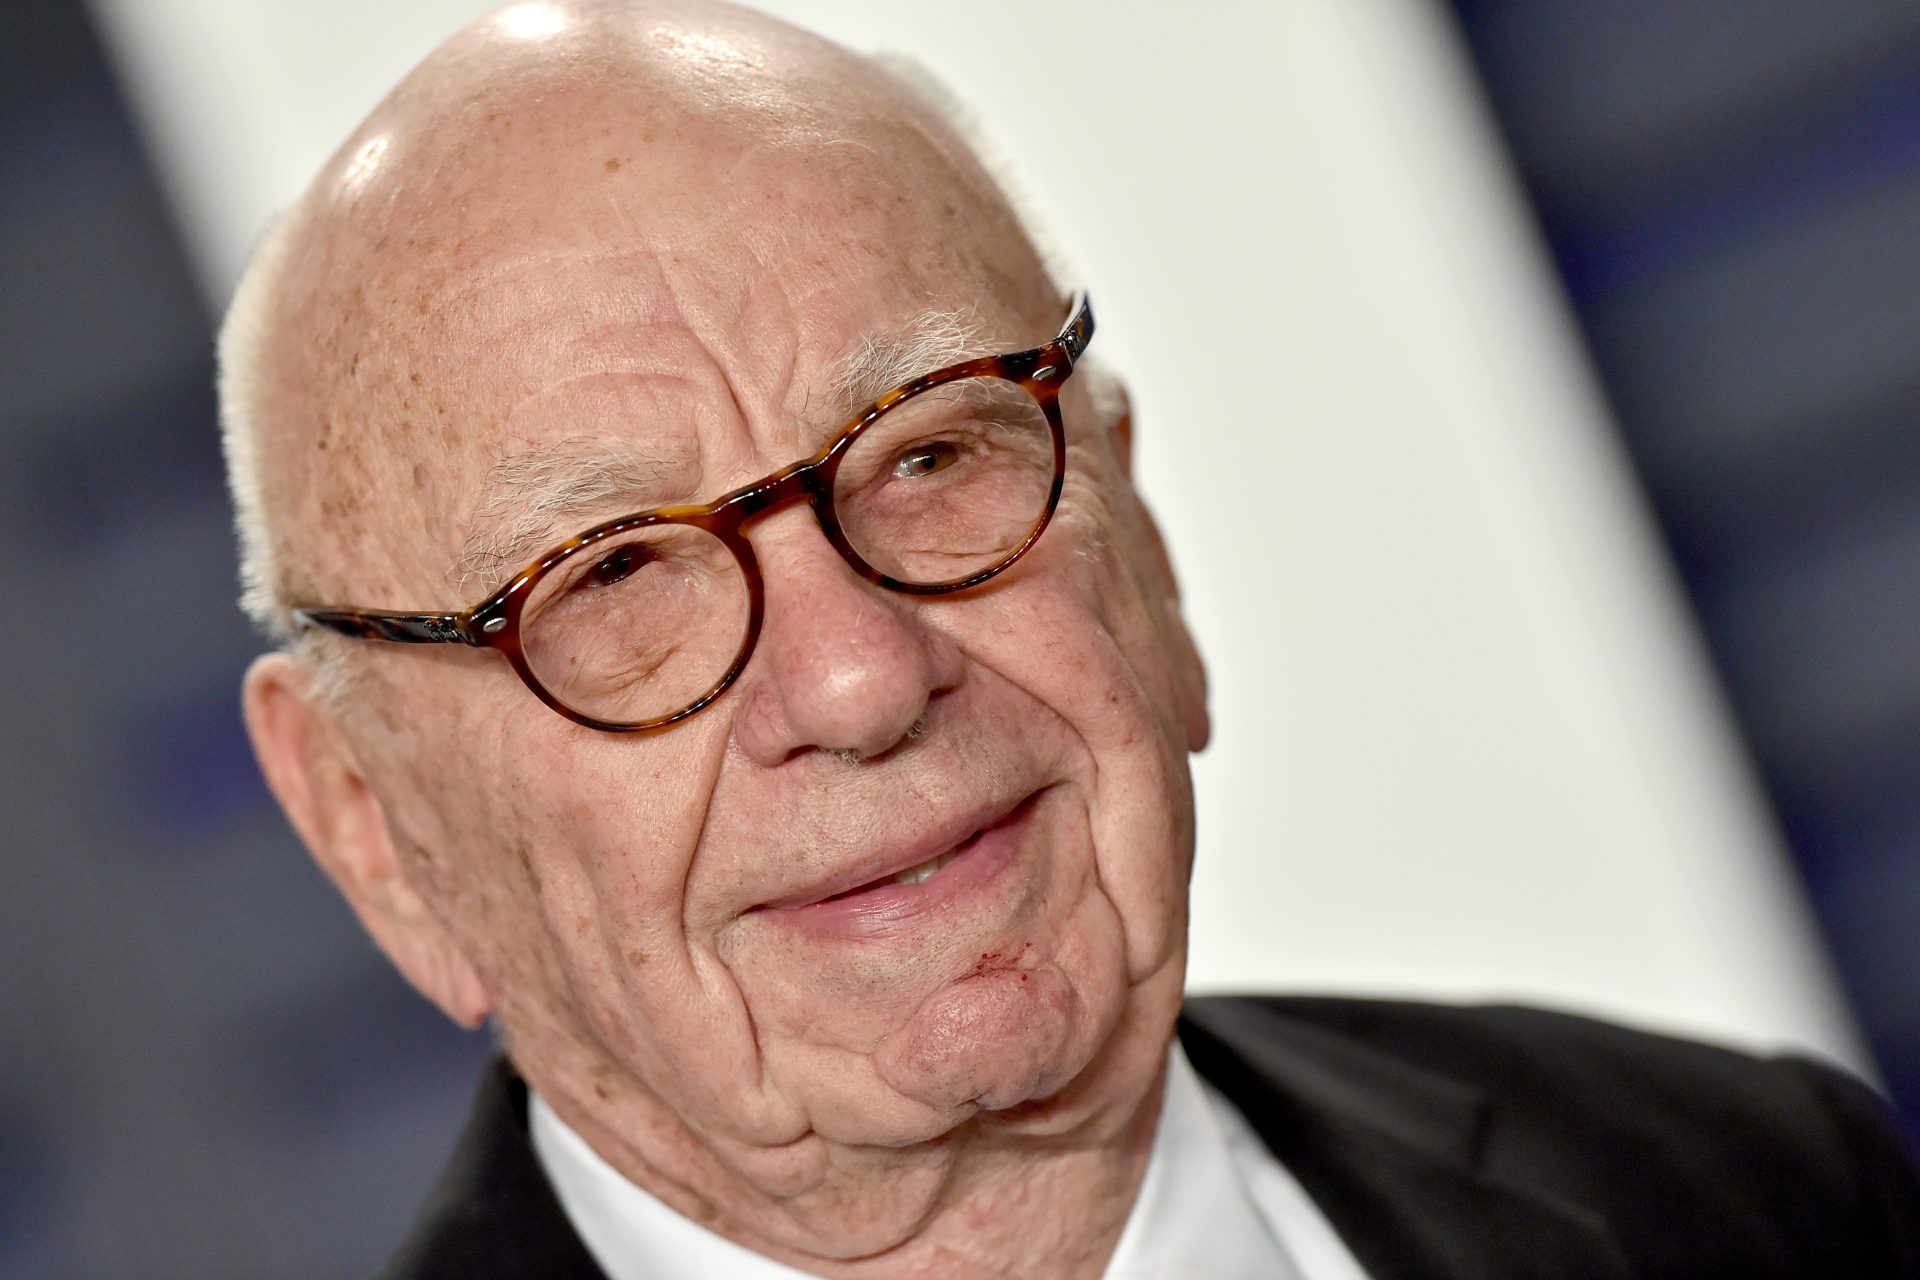 Rupert Murdoch, 92, is engaged to marry (again!)